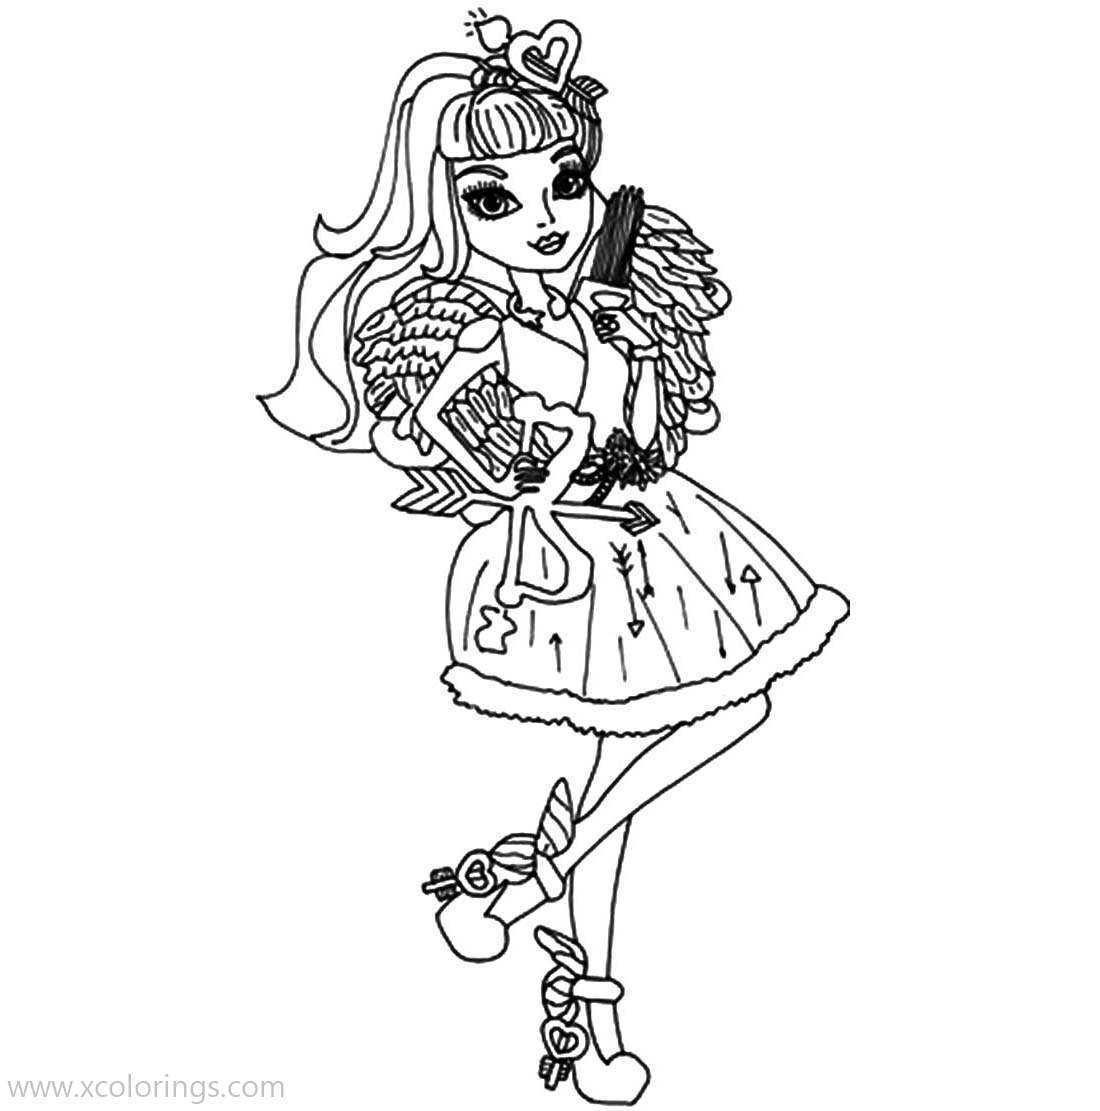 Apple White from Ever After High Coloring Pages - XColorings.com